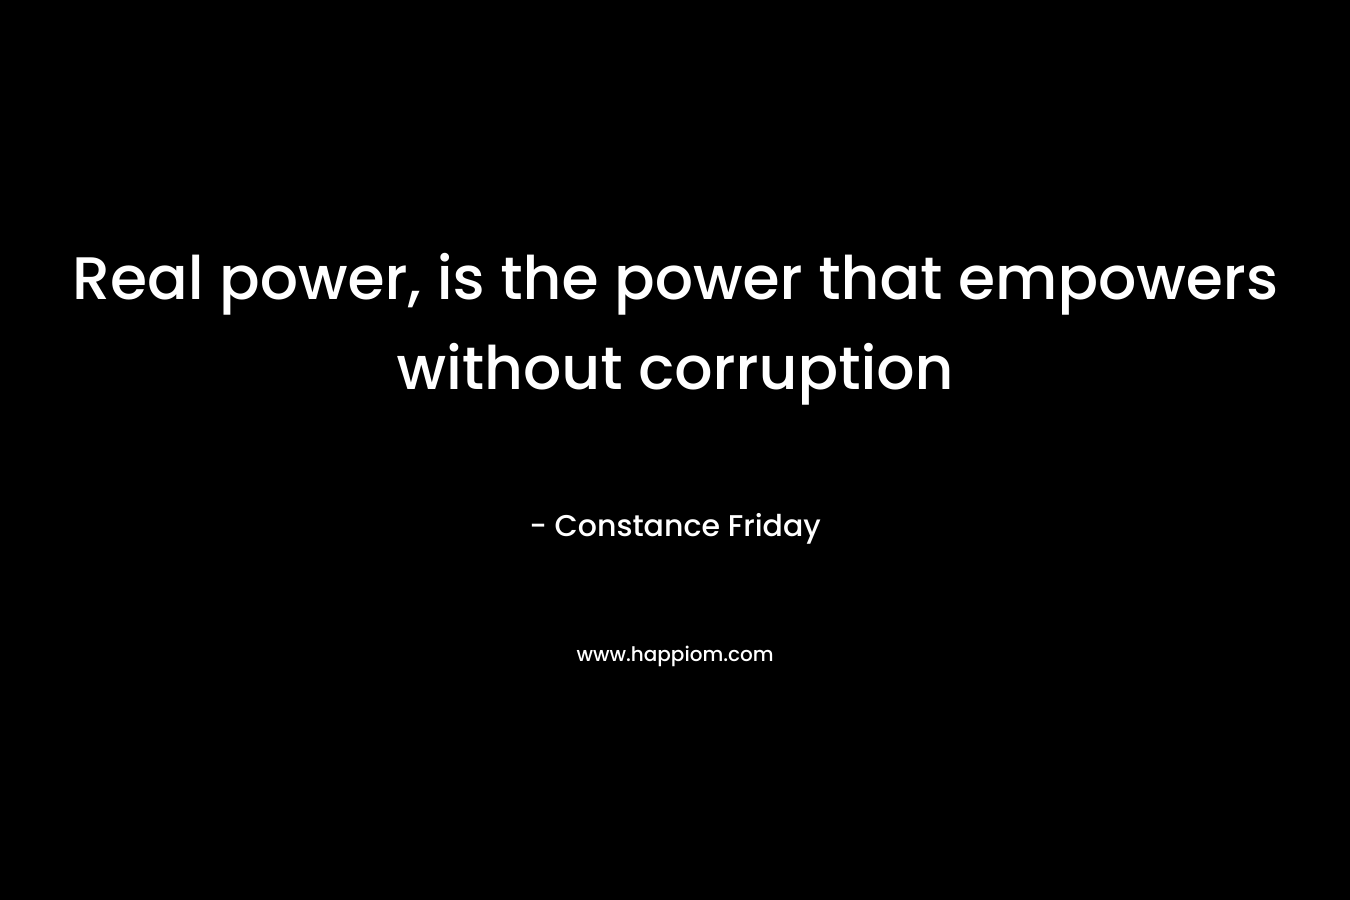 Real power, is the power that empowers without corruption